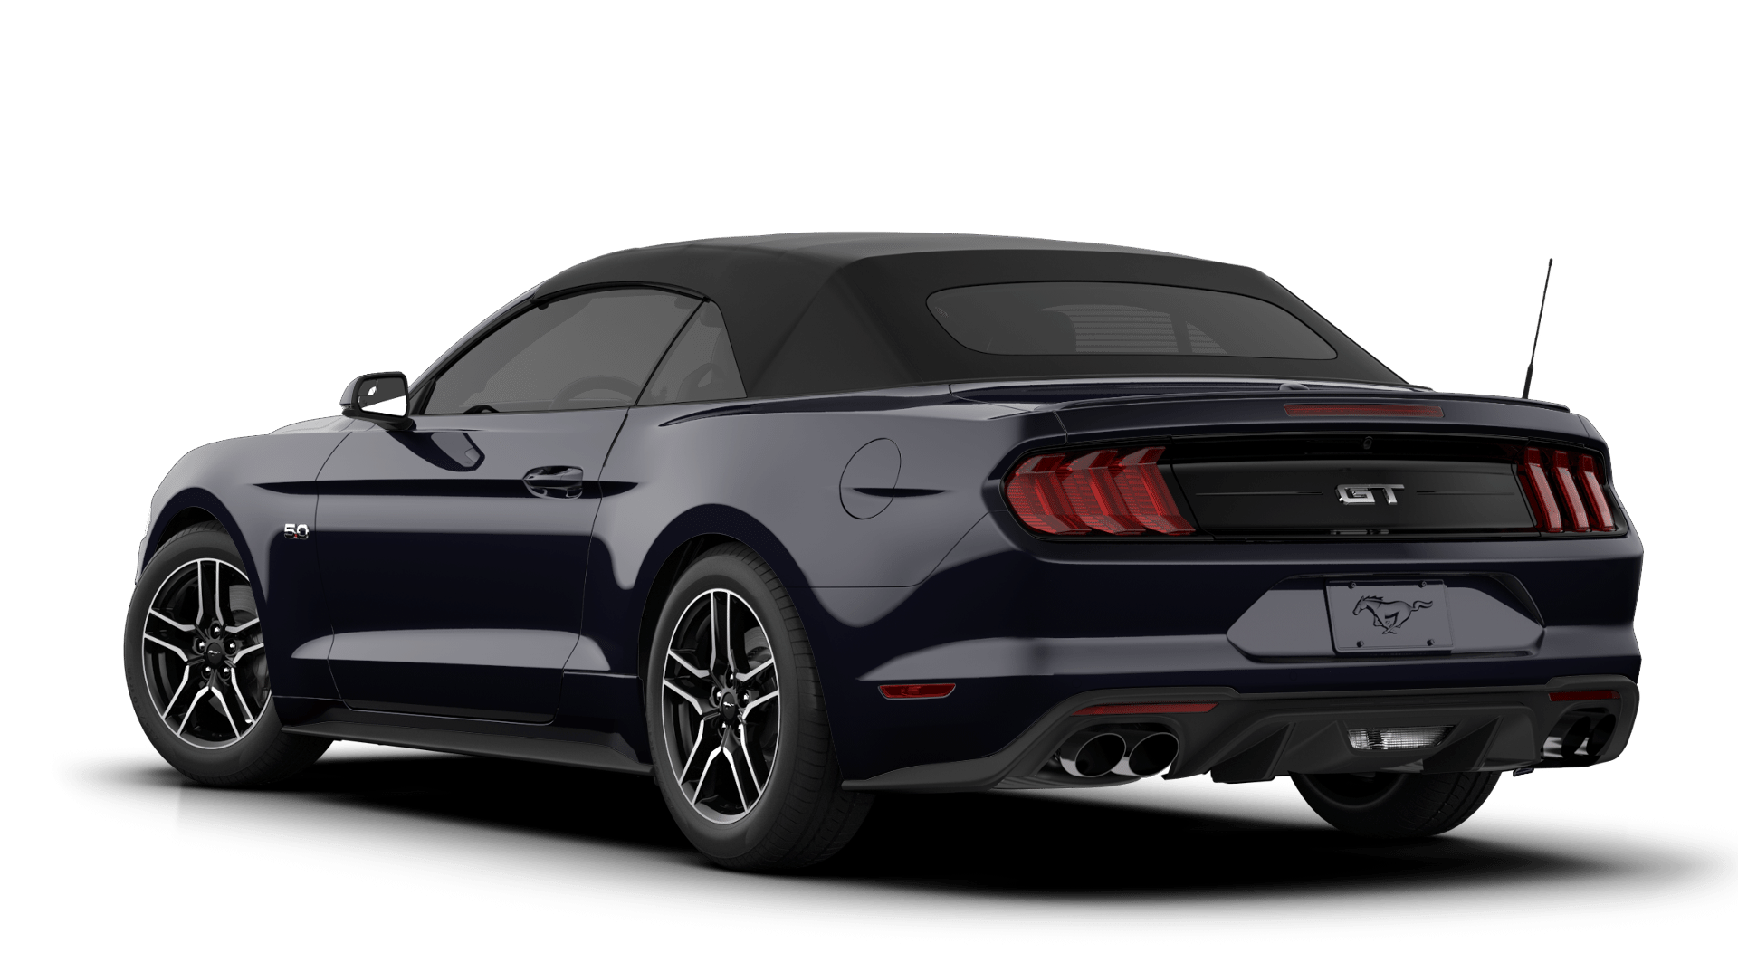 2020 Mustang Gt Convertible Pictures
